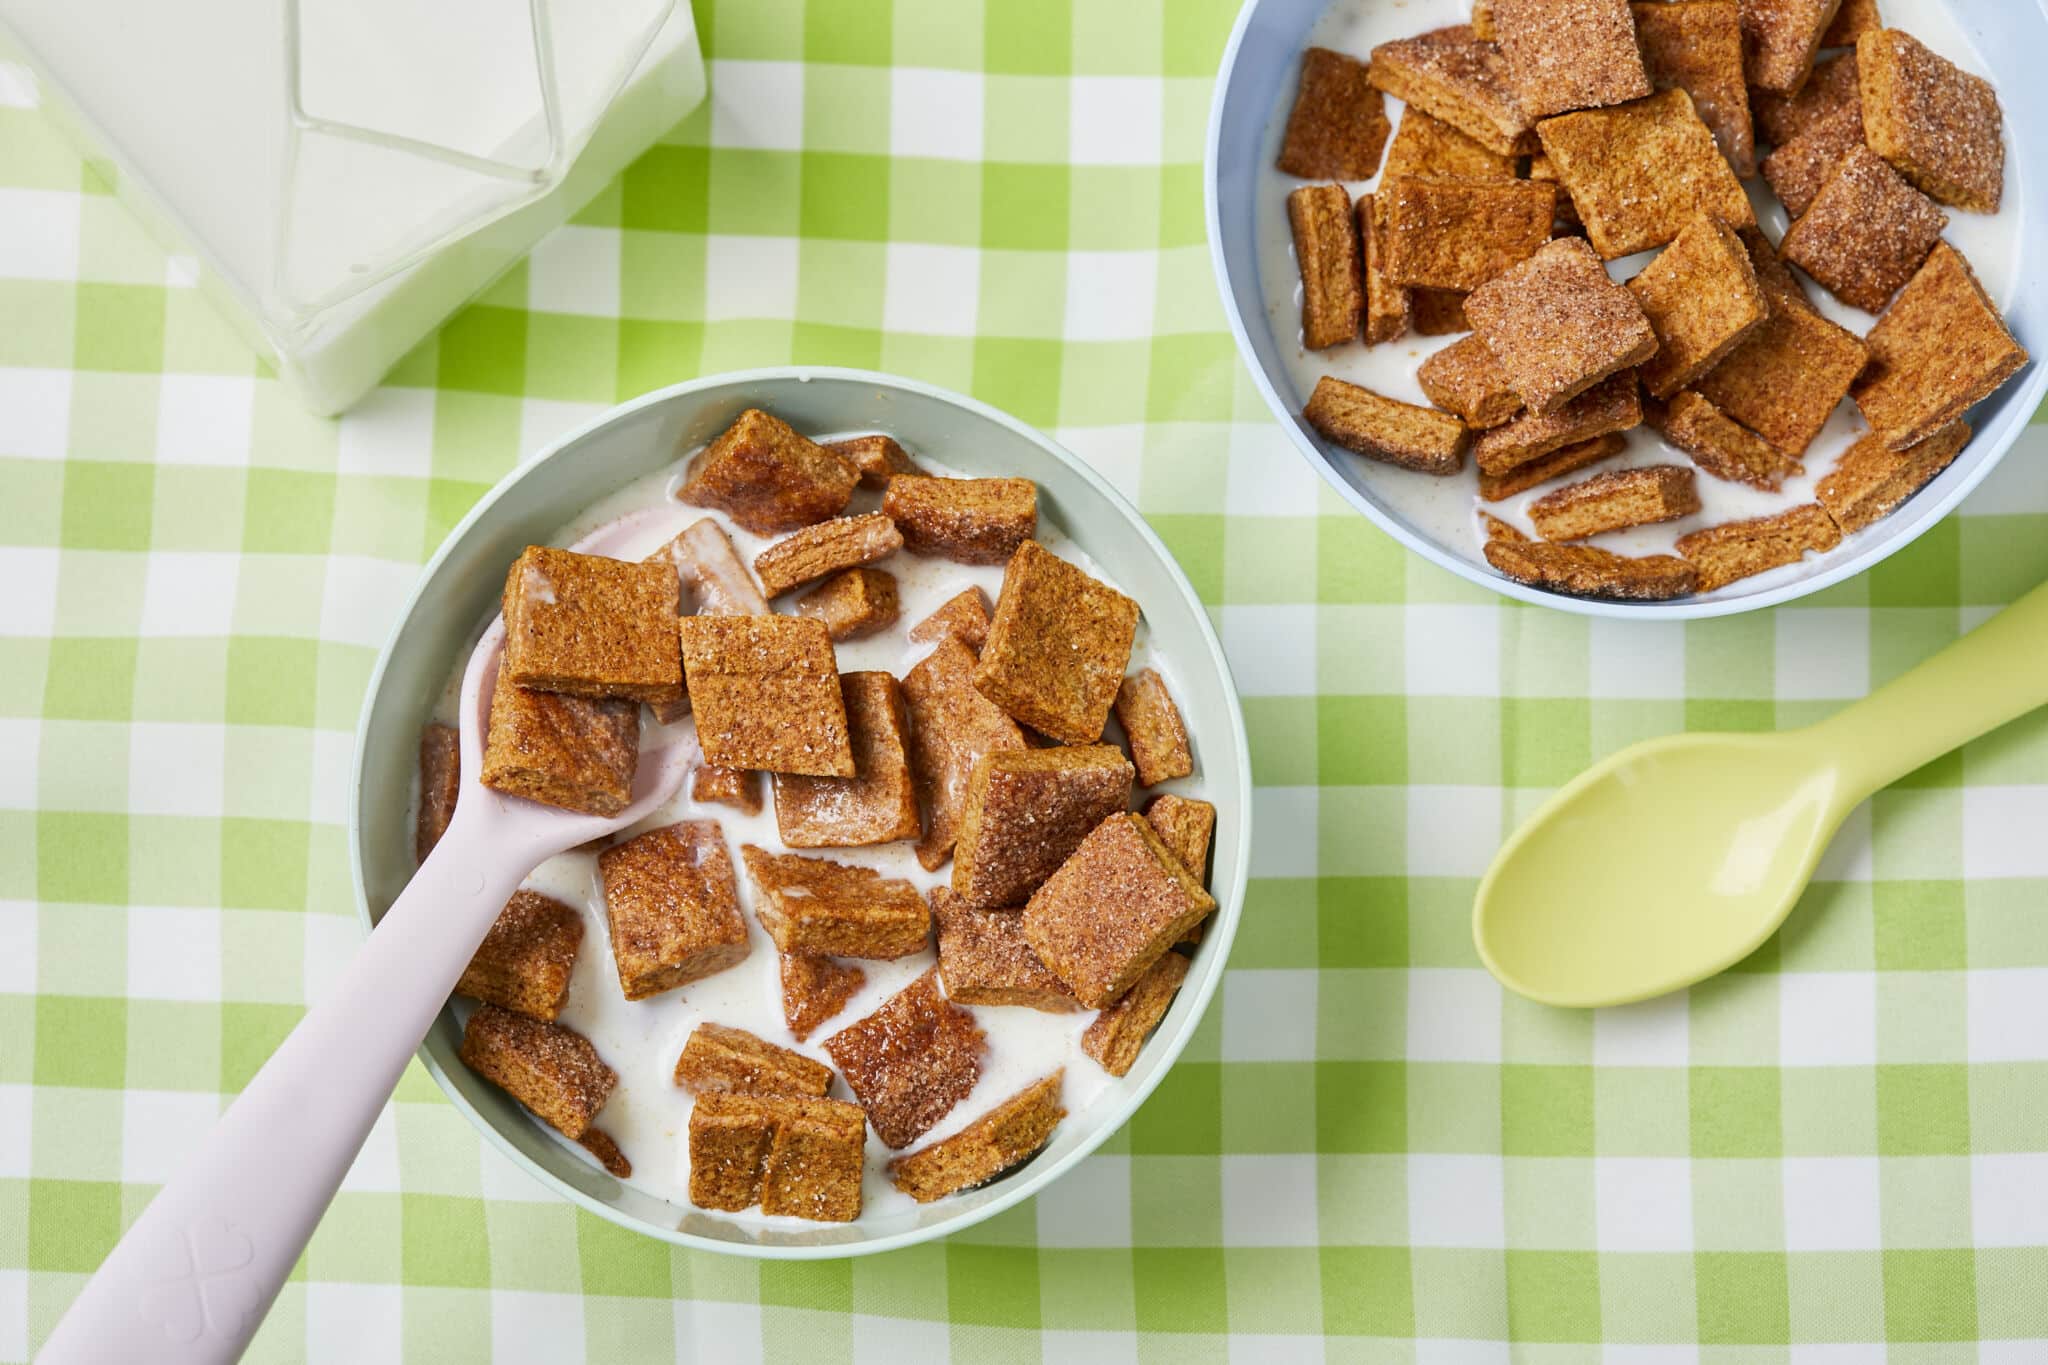 Two bowls of Homemade Cinnamon Toast Crunch cereal is served with milk and spoons with the milk bottle on the left side. The cereal has hearty, extra-crispy squares of sweet, warmly-spicy cinnamon flavor. This wholesome version is a welcome and cozy option for breakfast or a snack.